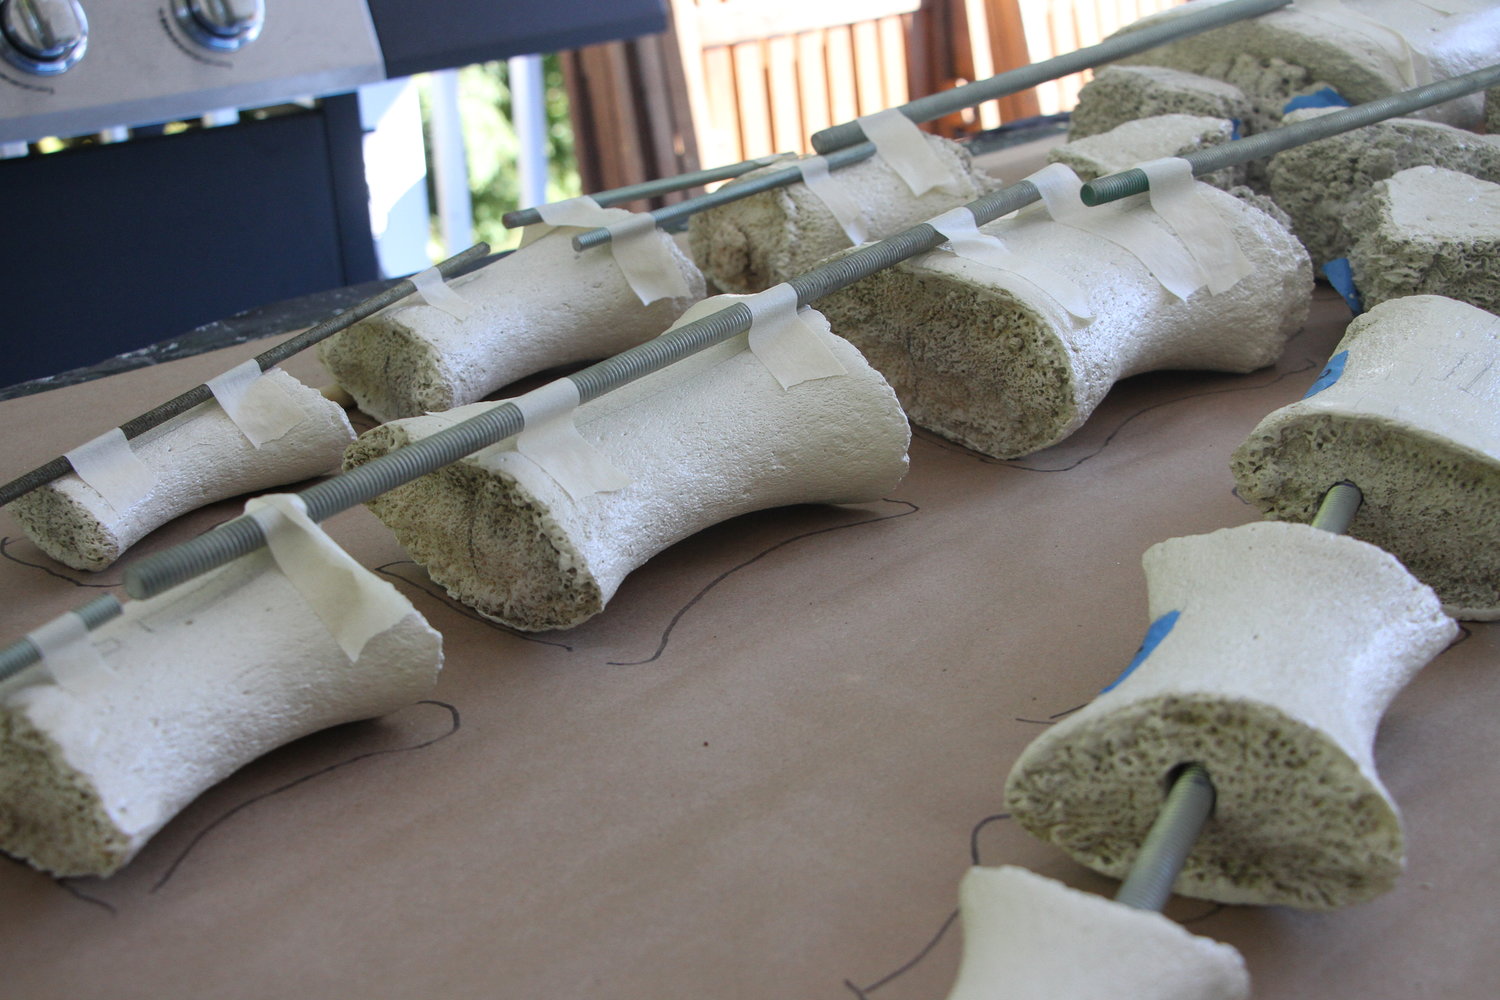 The flipper bones of a gray whale displayed on a table at the home of Mario Rivera and Stefanie Worwag